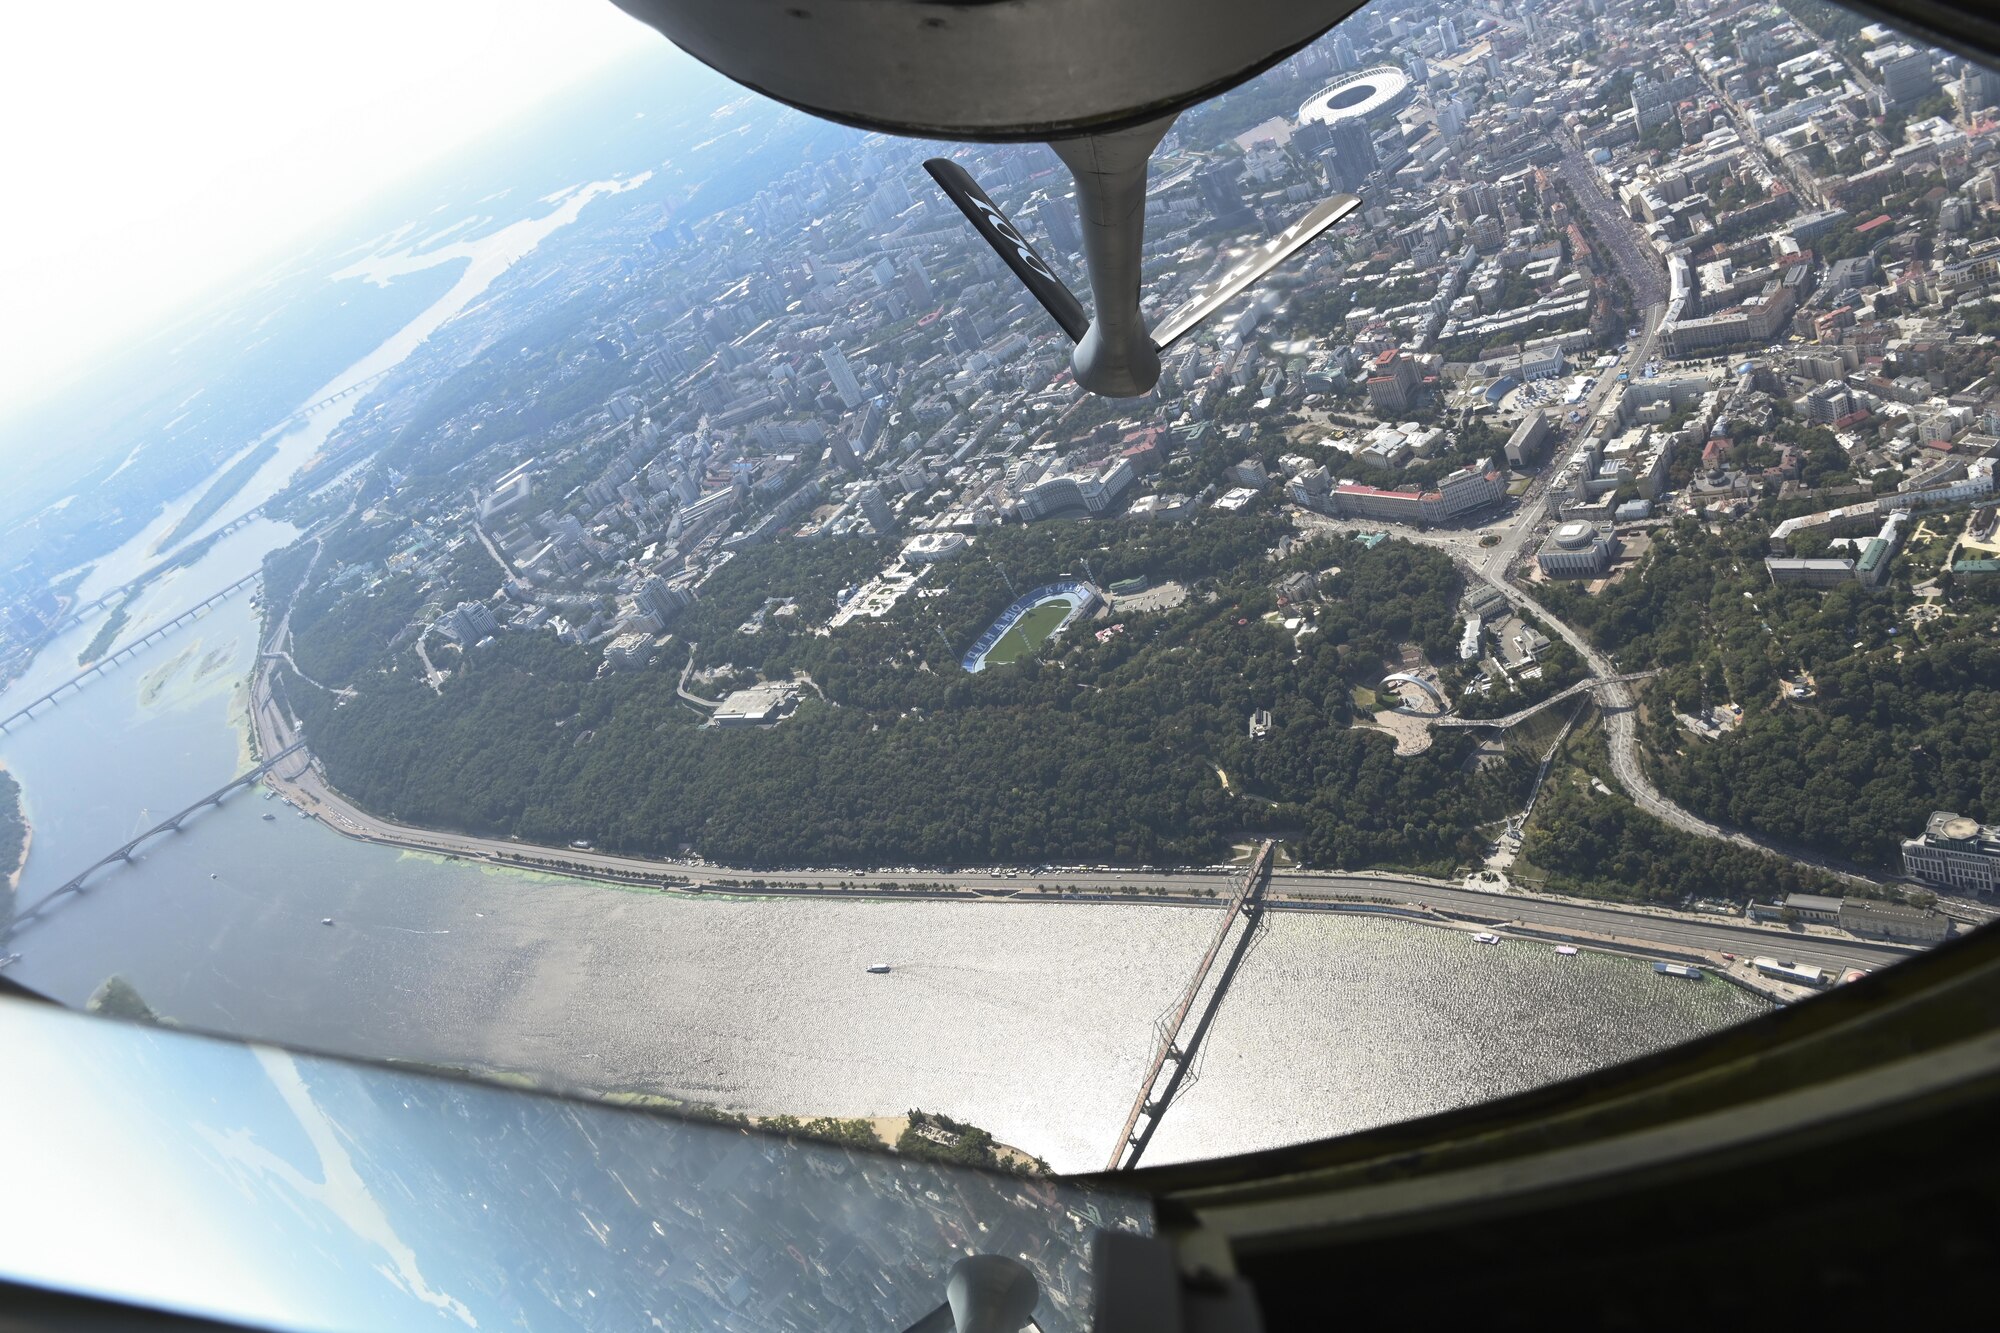 A U.S. Air Force KC-135 Stratotanker aircraft assigned to the 100th Air Refueling Wing, Royal Air Force Mildenhall, England, flies over Kyiv, Ukraine, to commemorate the 30th anniversary of Ukrainian independence Aug, 24, 2021. U.S. European Command stands firm in its unwavering commitment to Ukraine’s sovereignty, territorial integrity and independence. (U.S. Air Force photo by Senior Airman Joseph Barron)